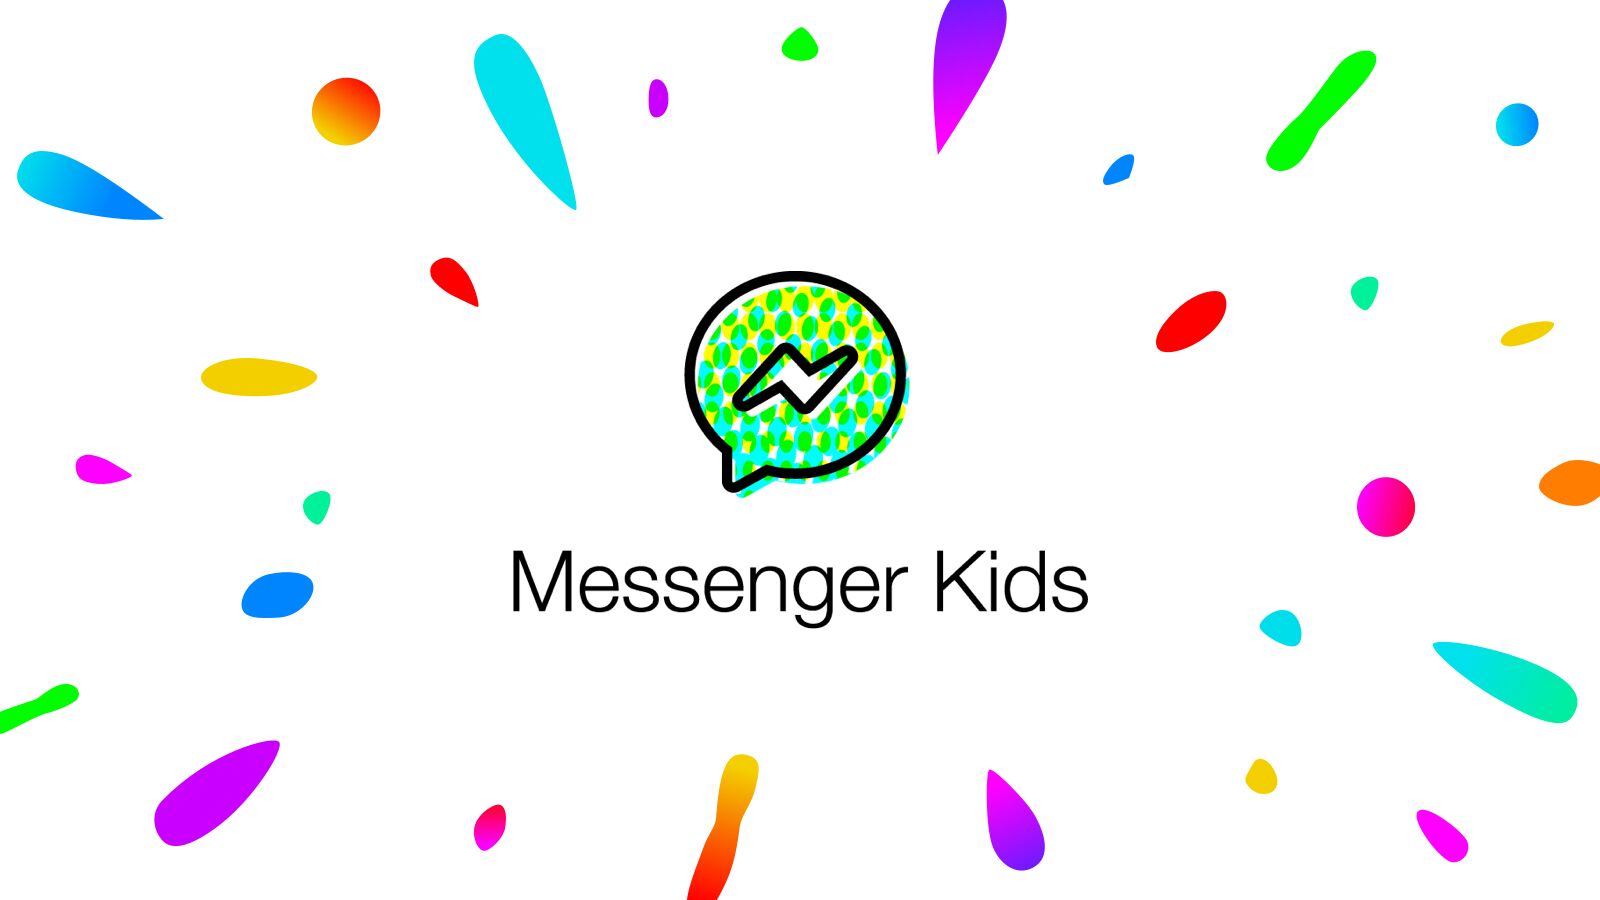 Messenger Kids launched, A new app for families to connect 1